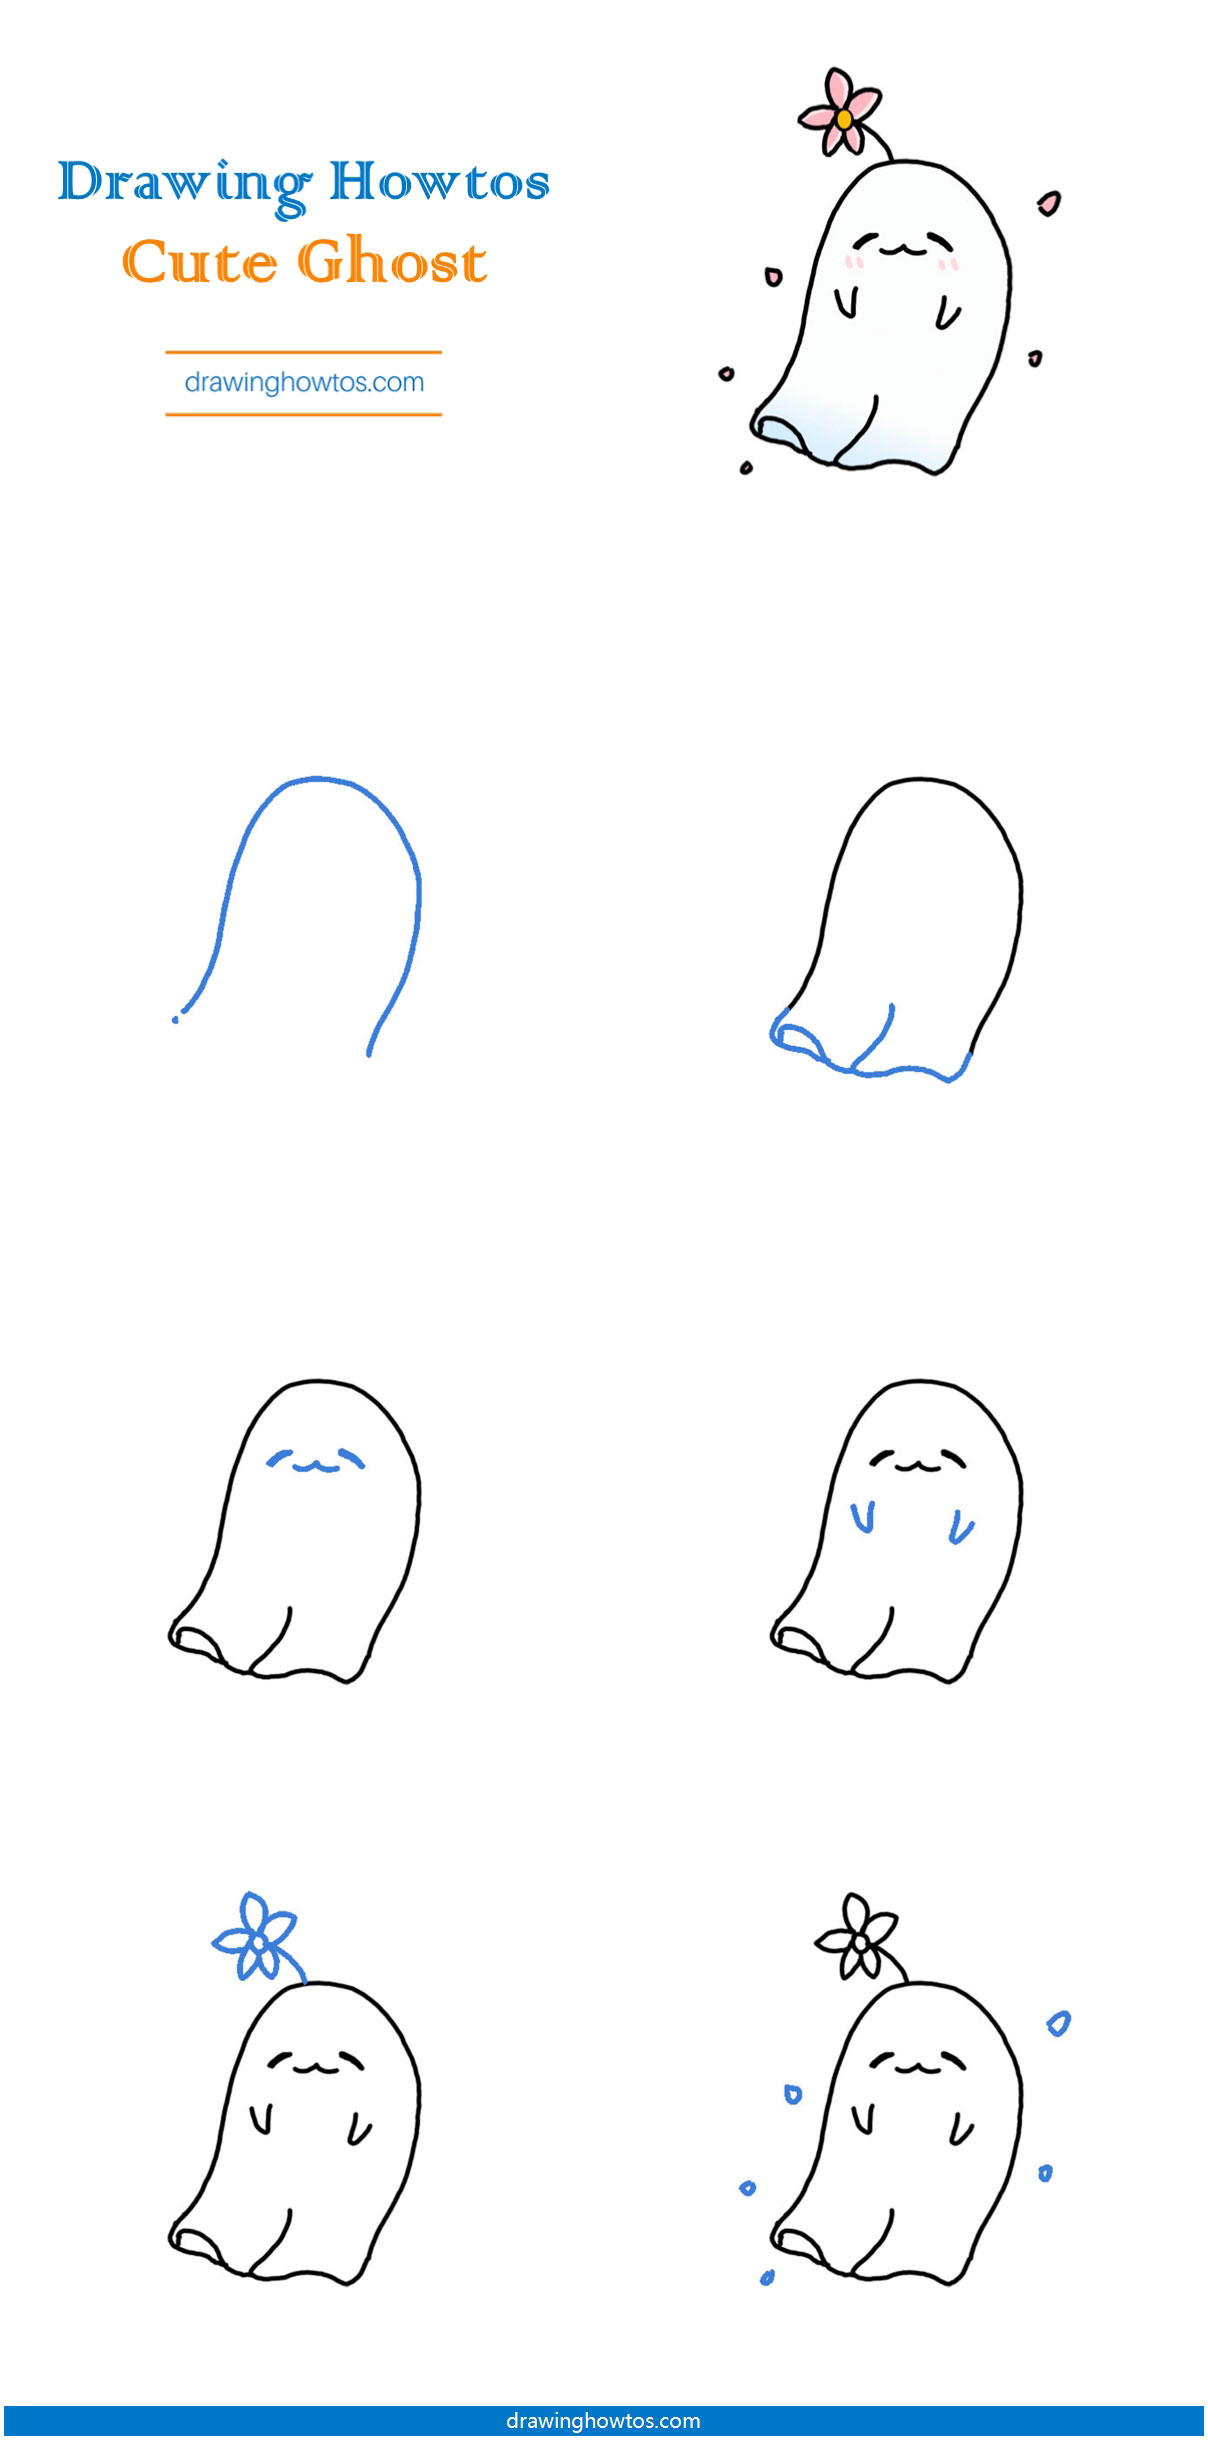 How to Draw a Cute Ghost Step by Step